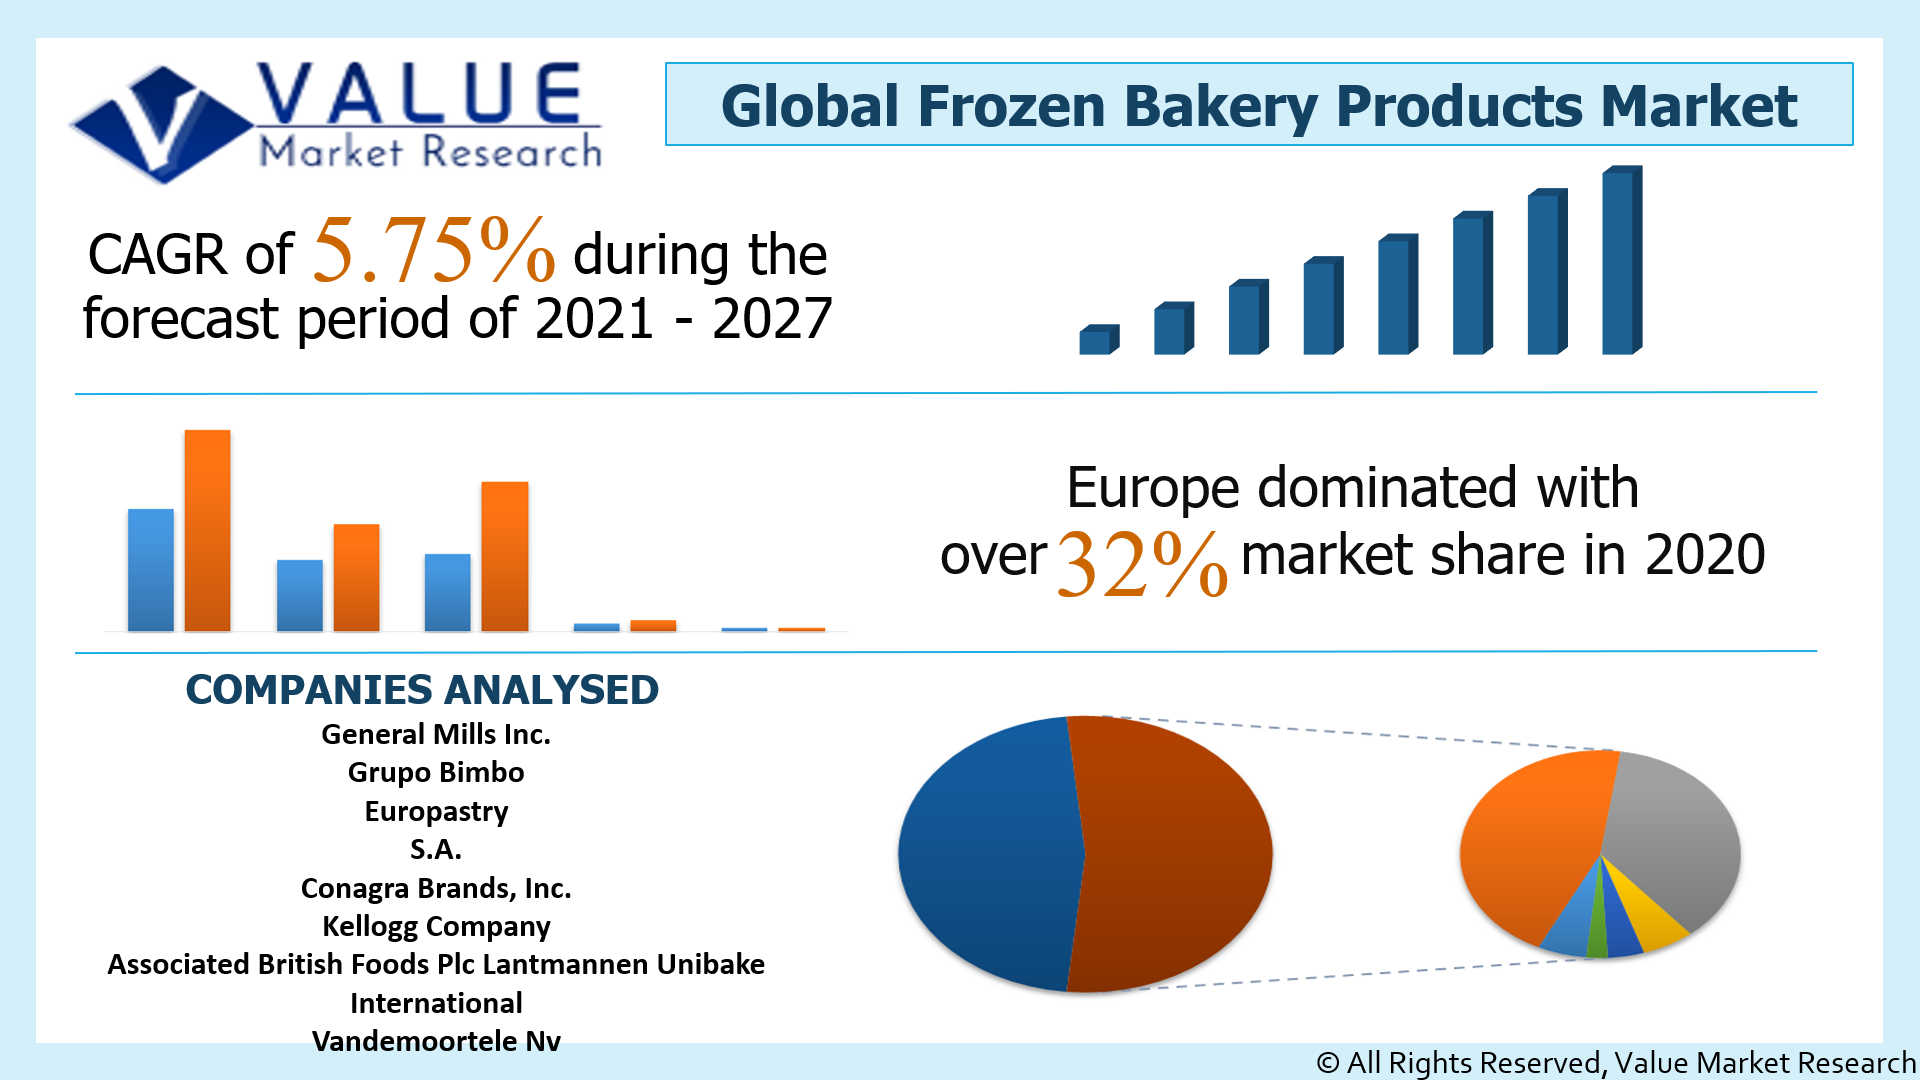 Global Frozen Bakery Products Market Share